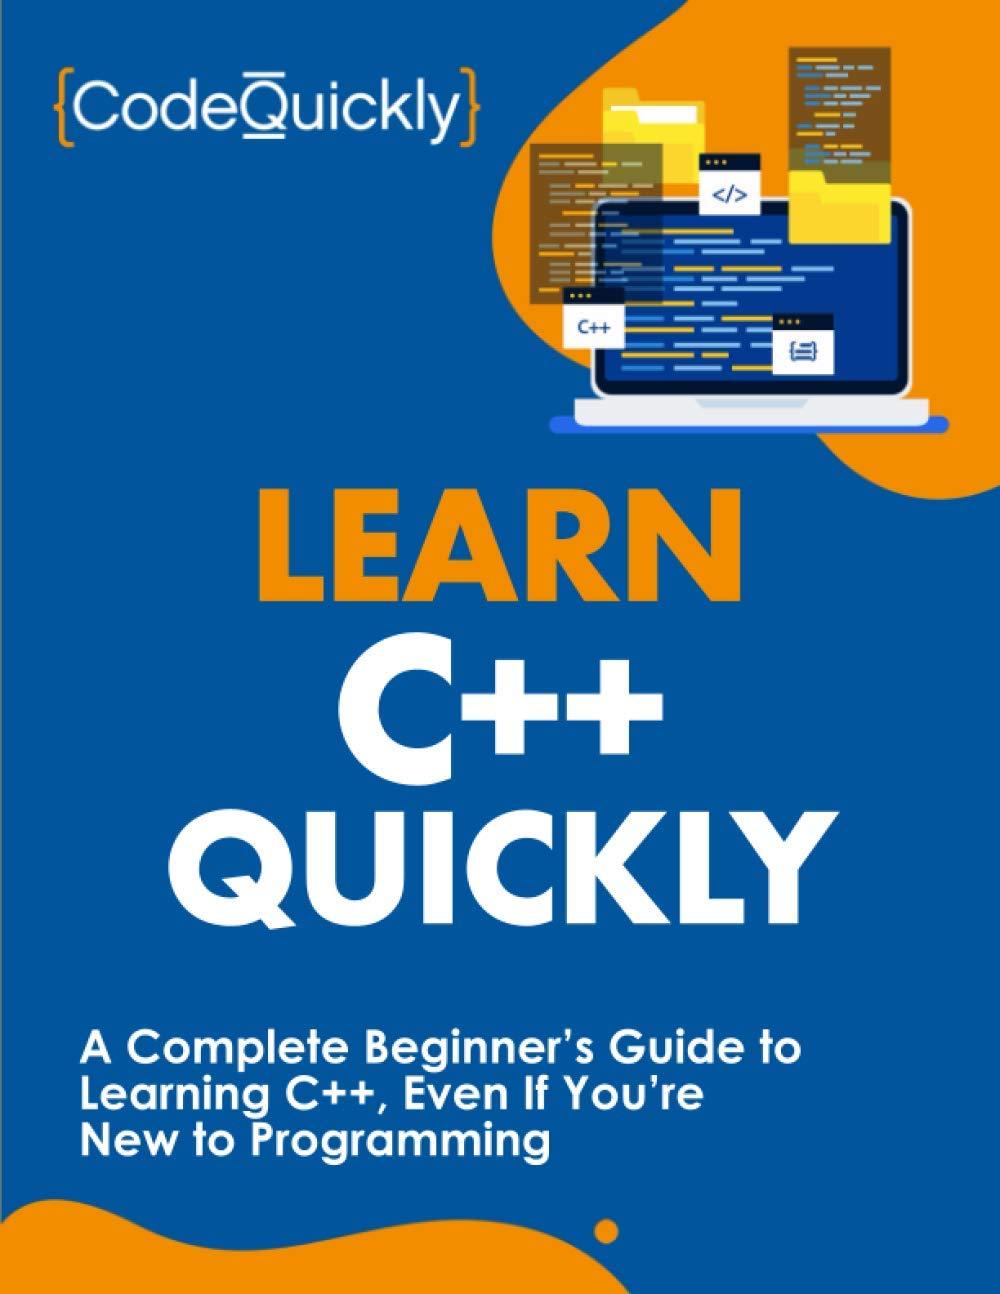 learn c++ quickly a complete beginner’s guide to learning c++ even if you’re new to programming 1st